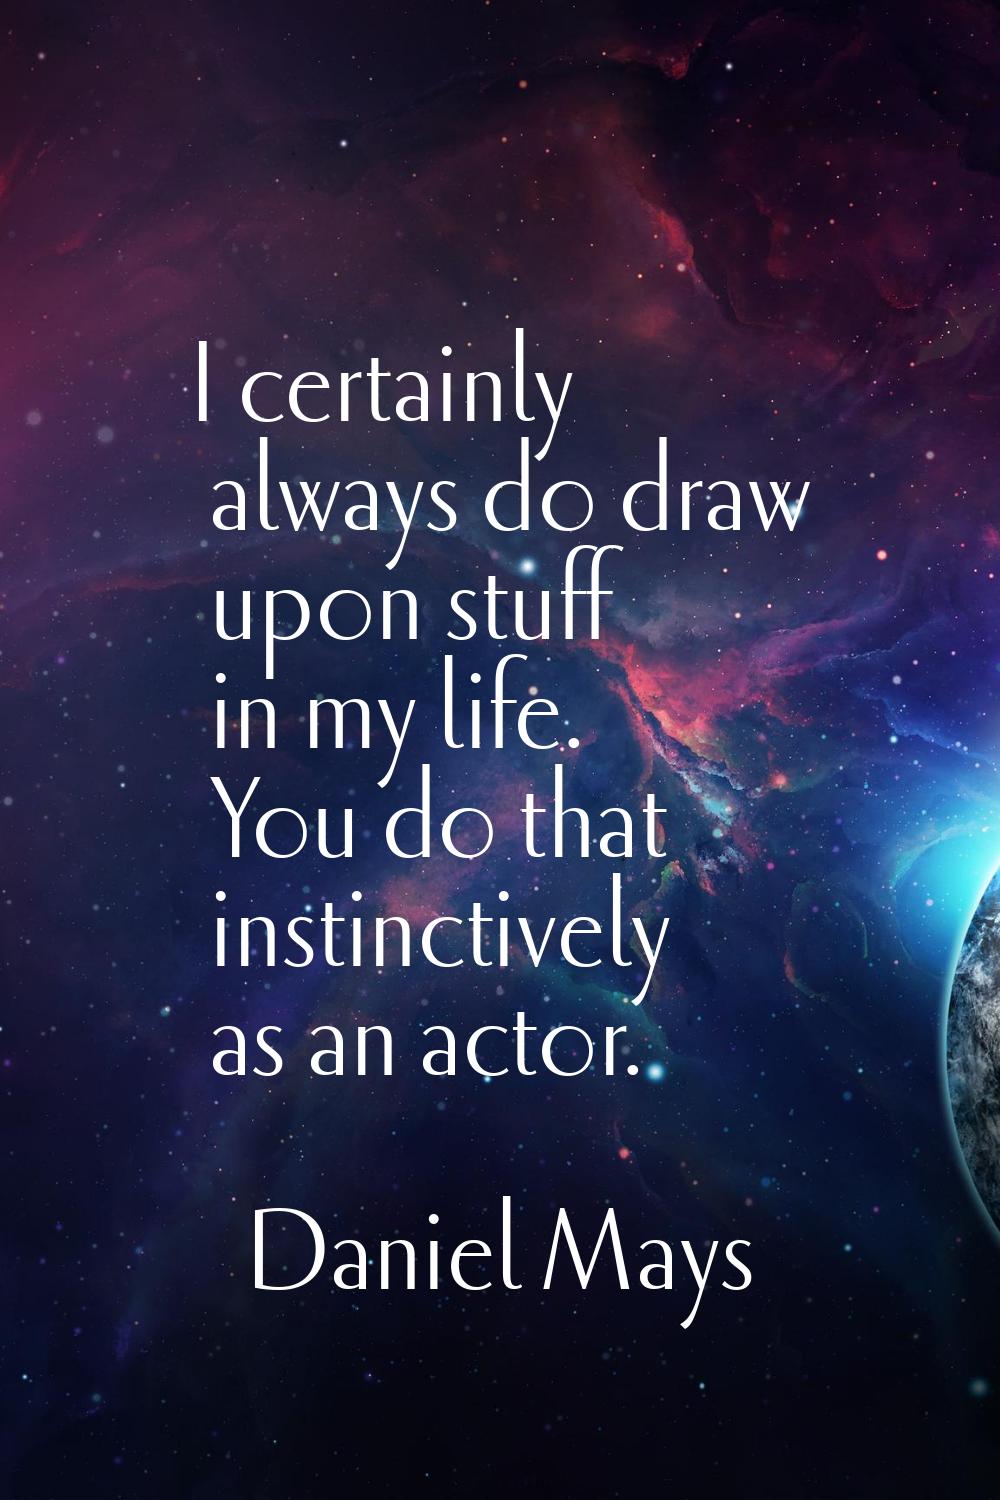 I certainly always do draw upon stuff in my life. You do that instinctively as an actor.